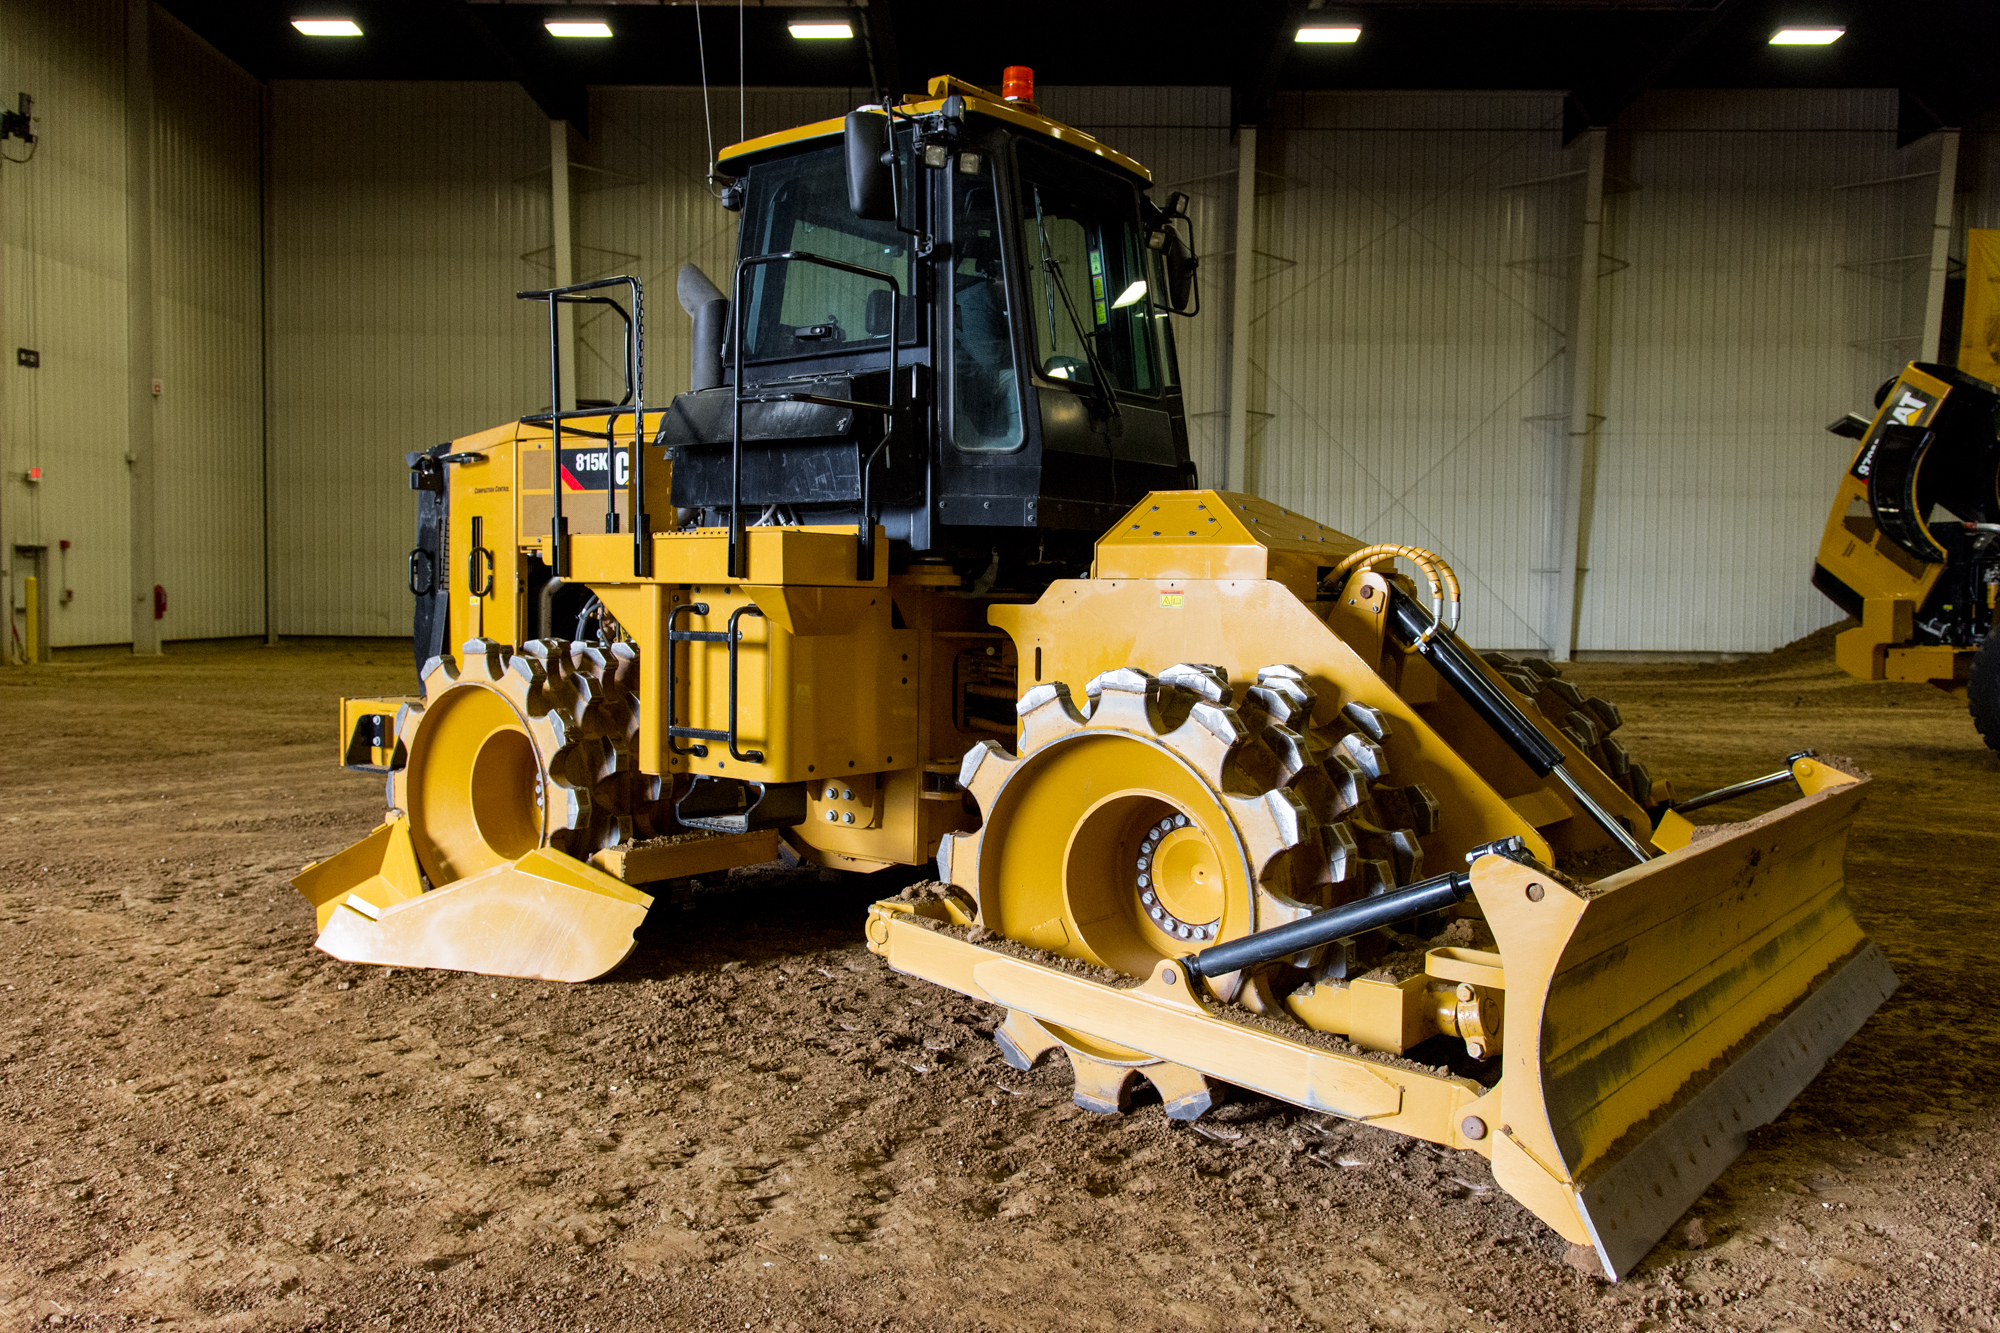 Caterpillar intros 815K soil compactor with improved cab and controls